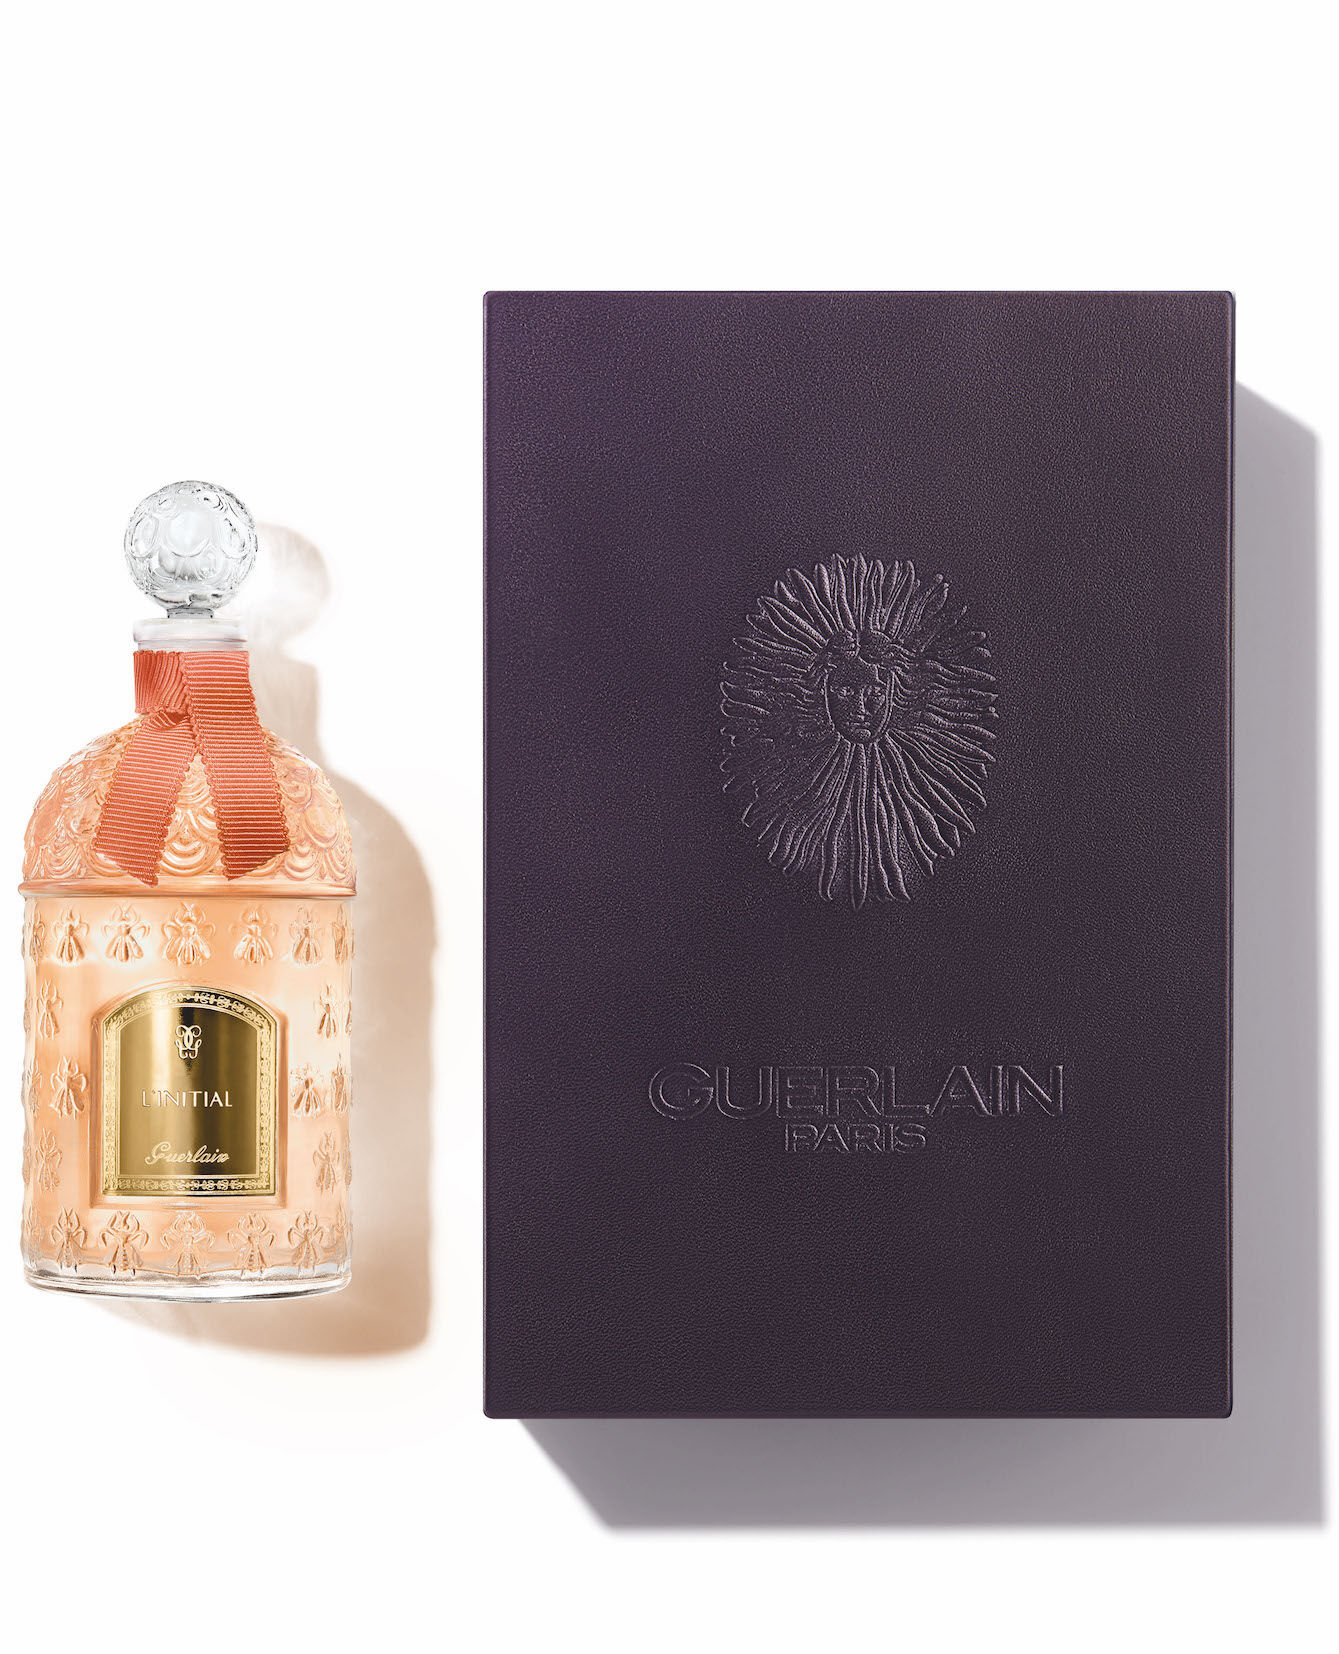 MADEMOISELLE GUERLAIN from Les Parisiennes, Exclusive Collection